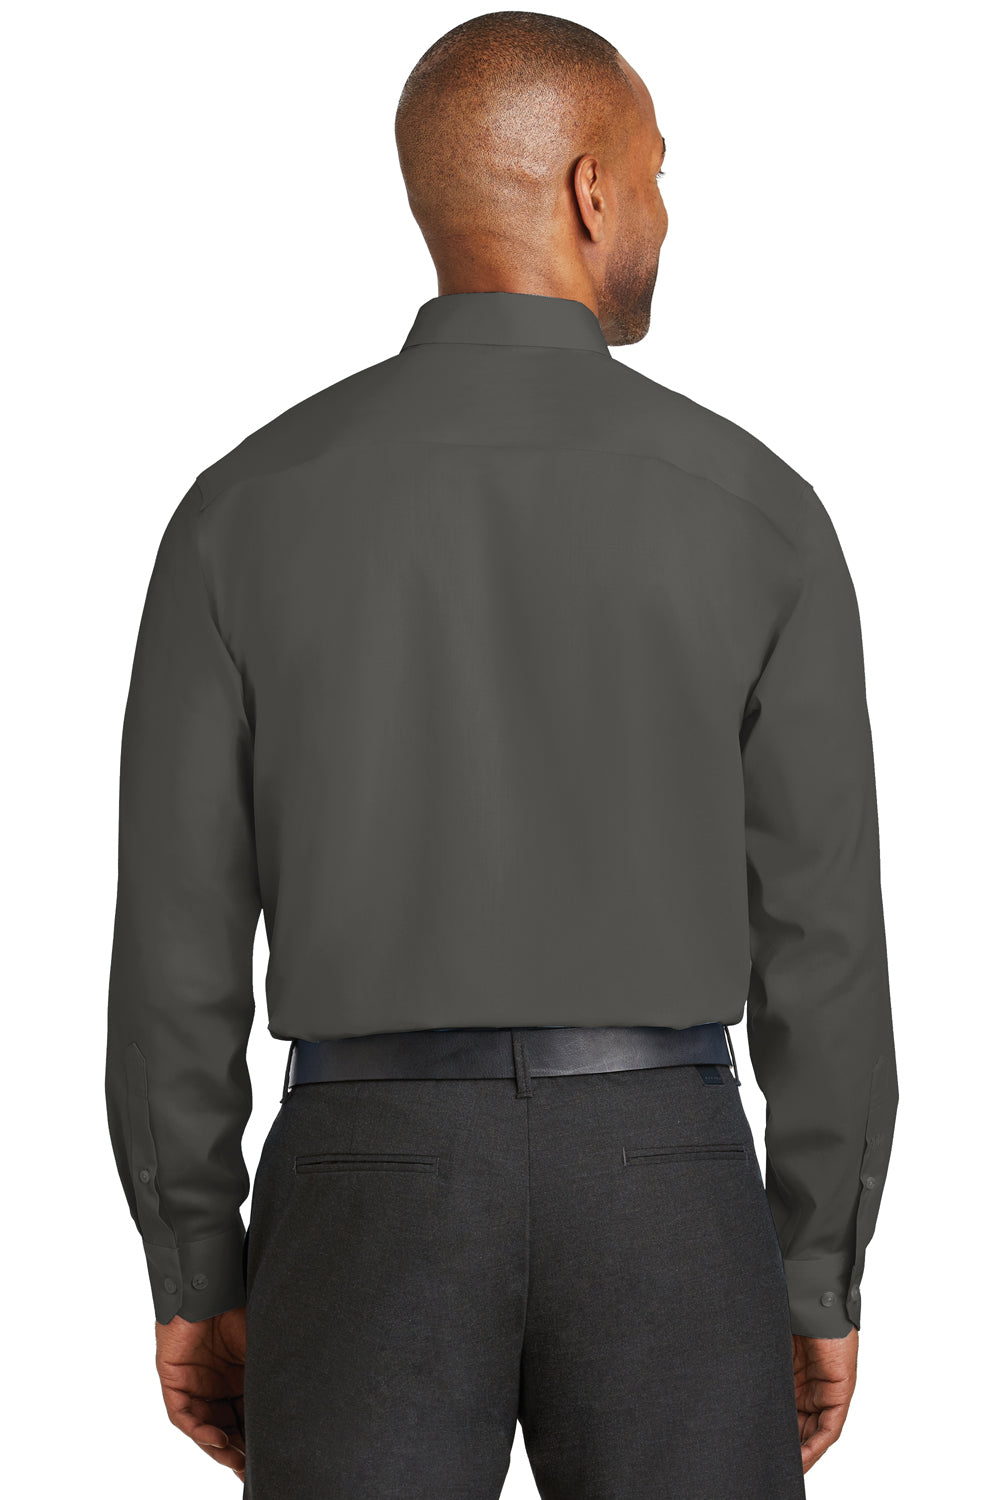 Red House RH78 Mens Wrinkle Resistant Long Sleeve Button Down Shirt w/ Pocket Steel Grey Back